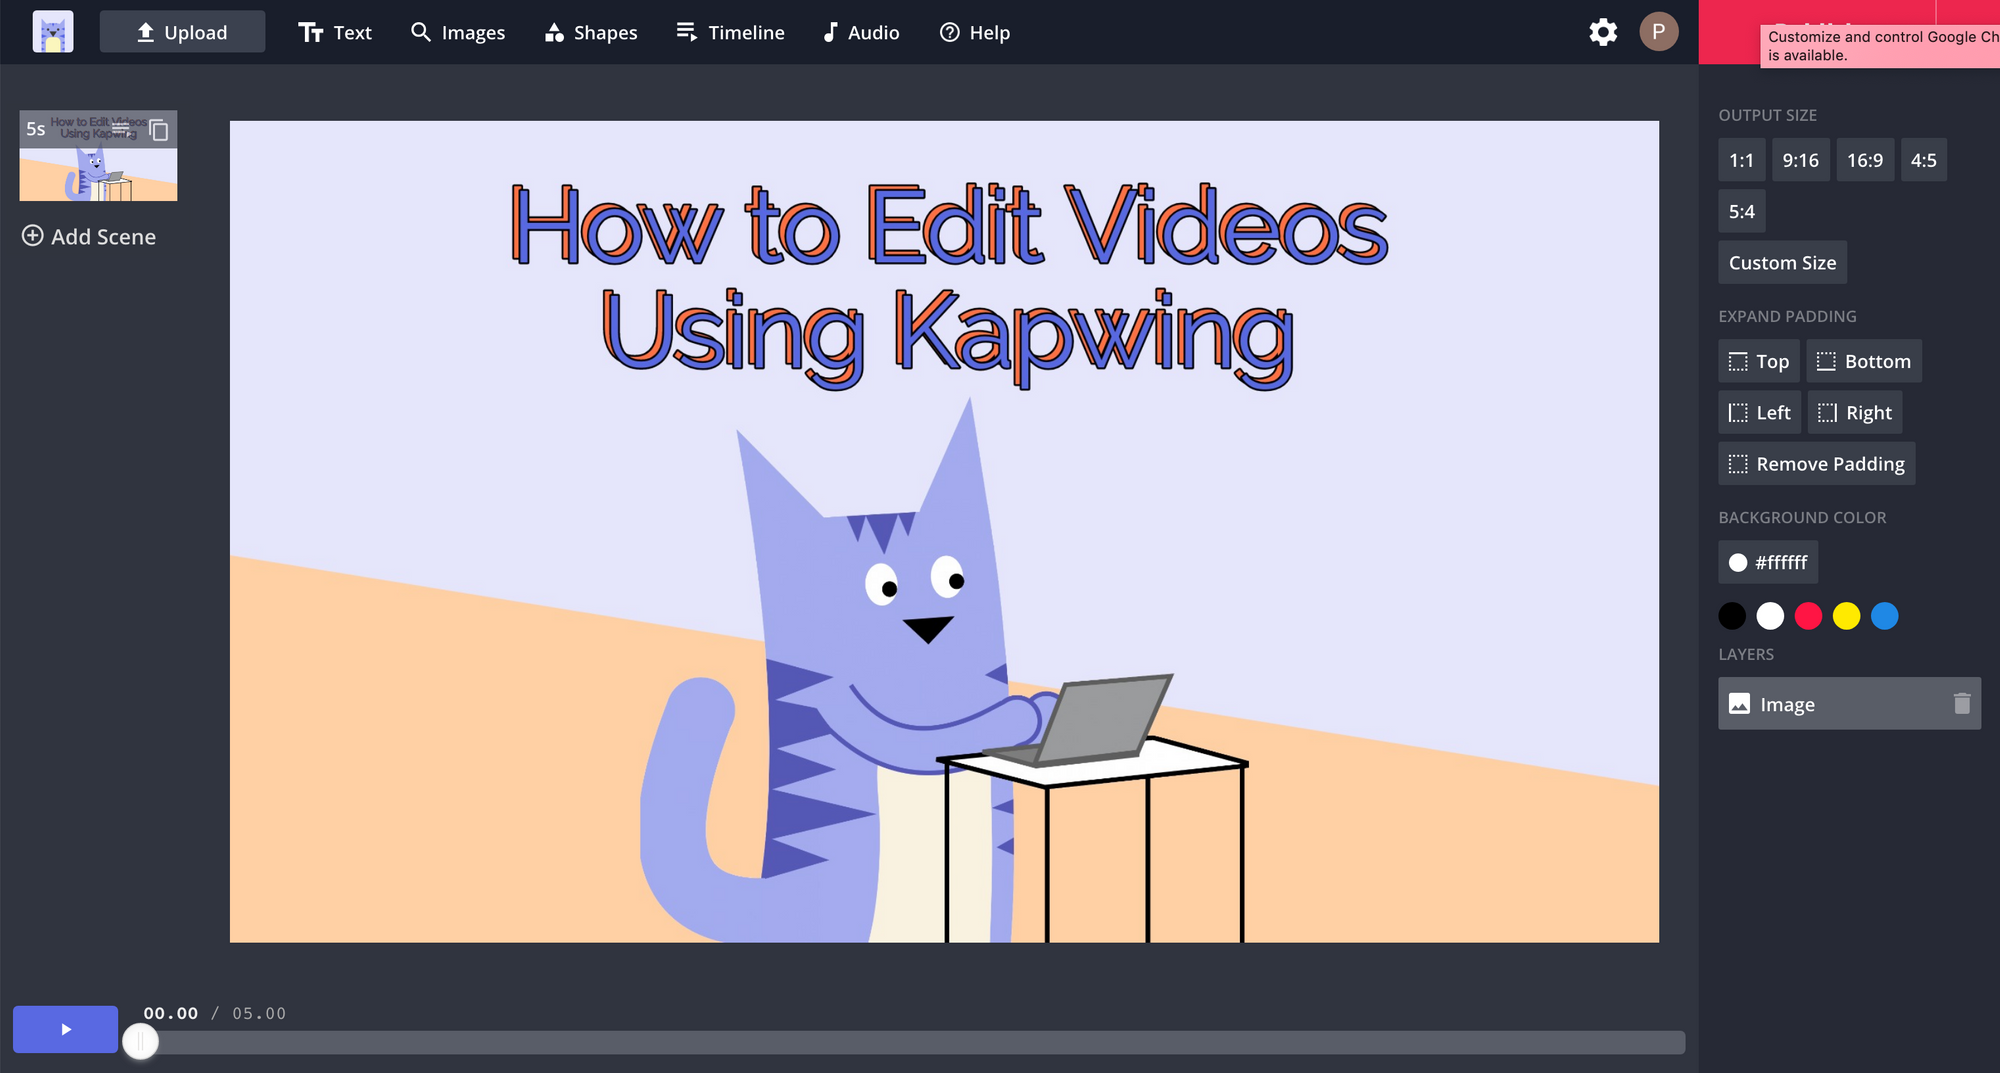 How to Edit Videos with Kapwing